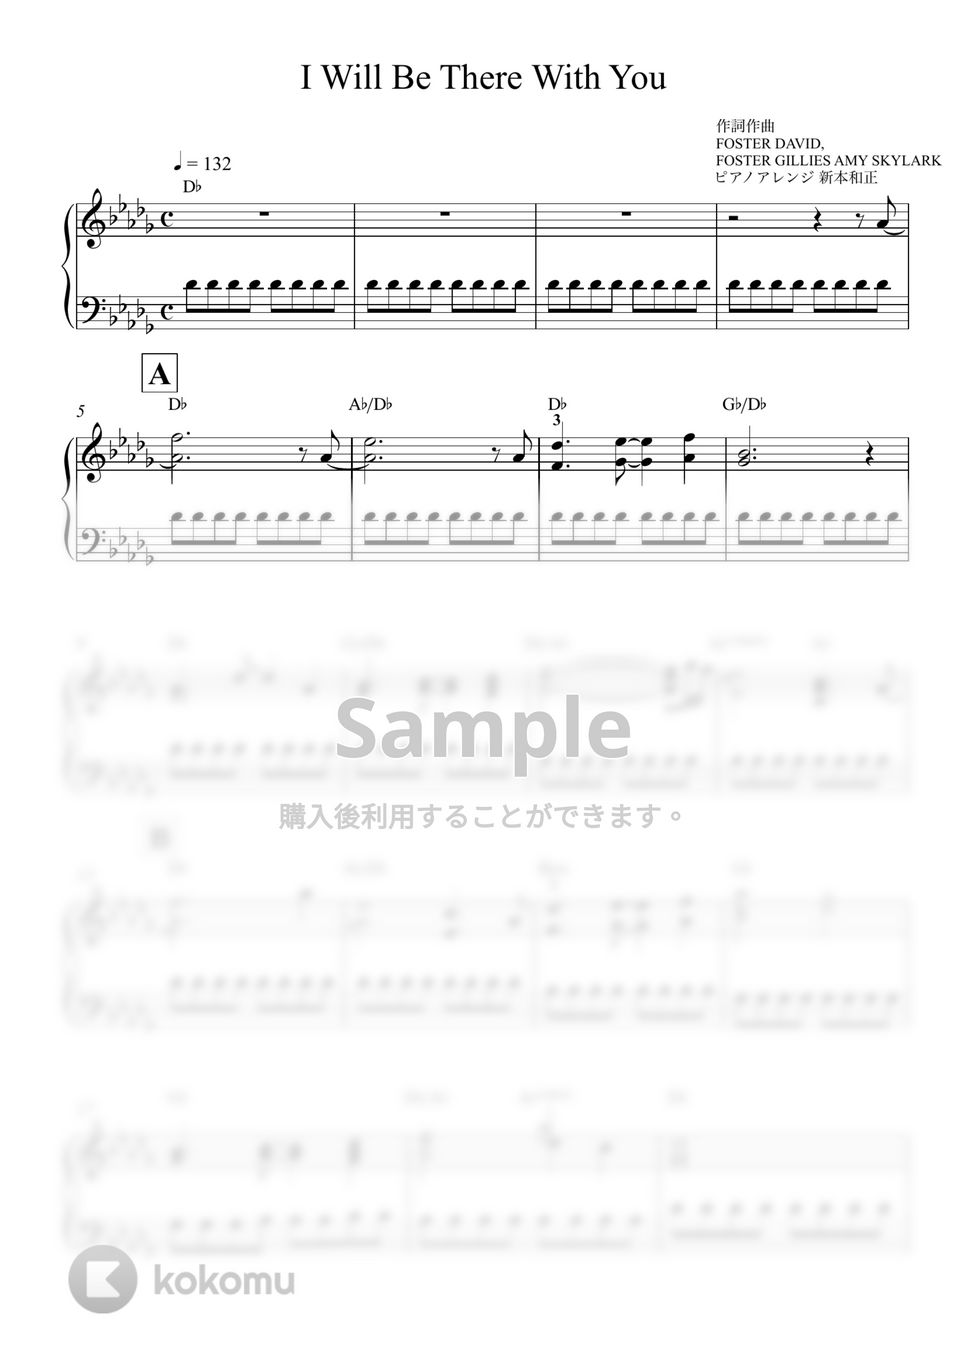 David Foster - I Will Be There With You by 新本和正